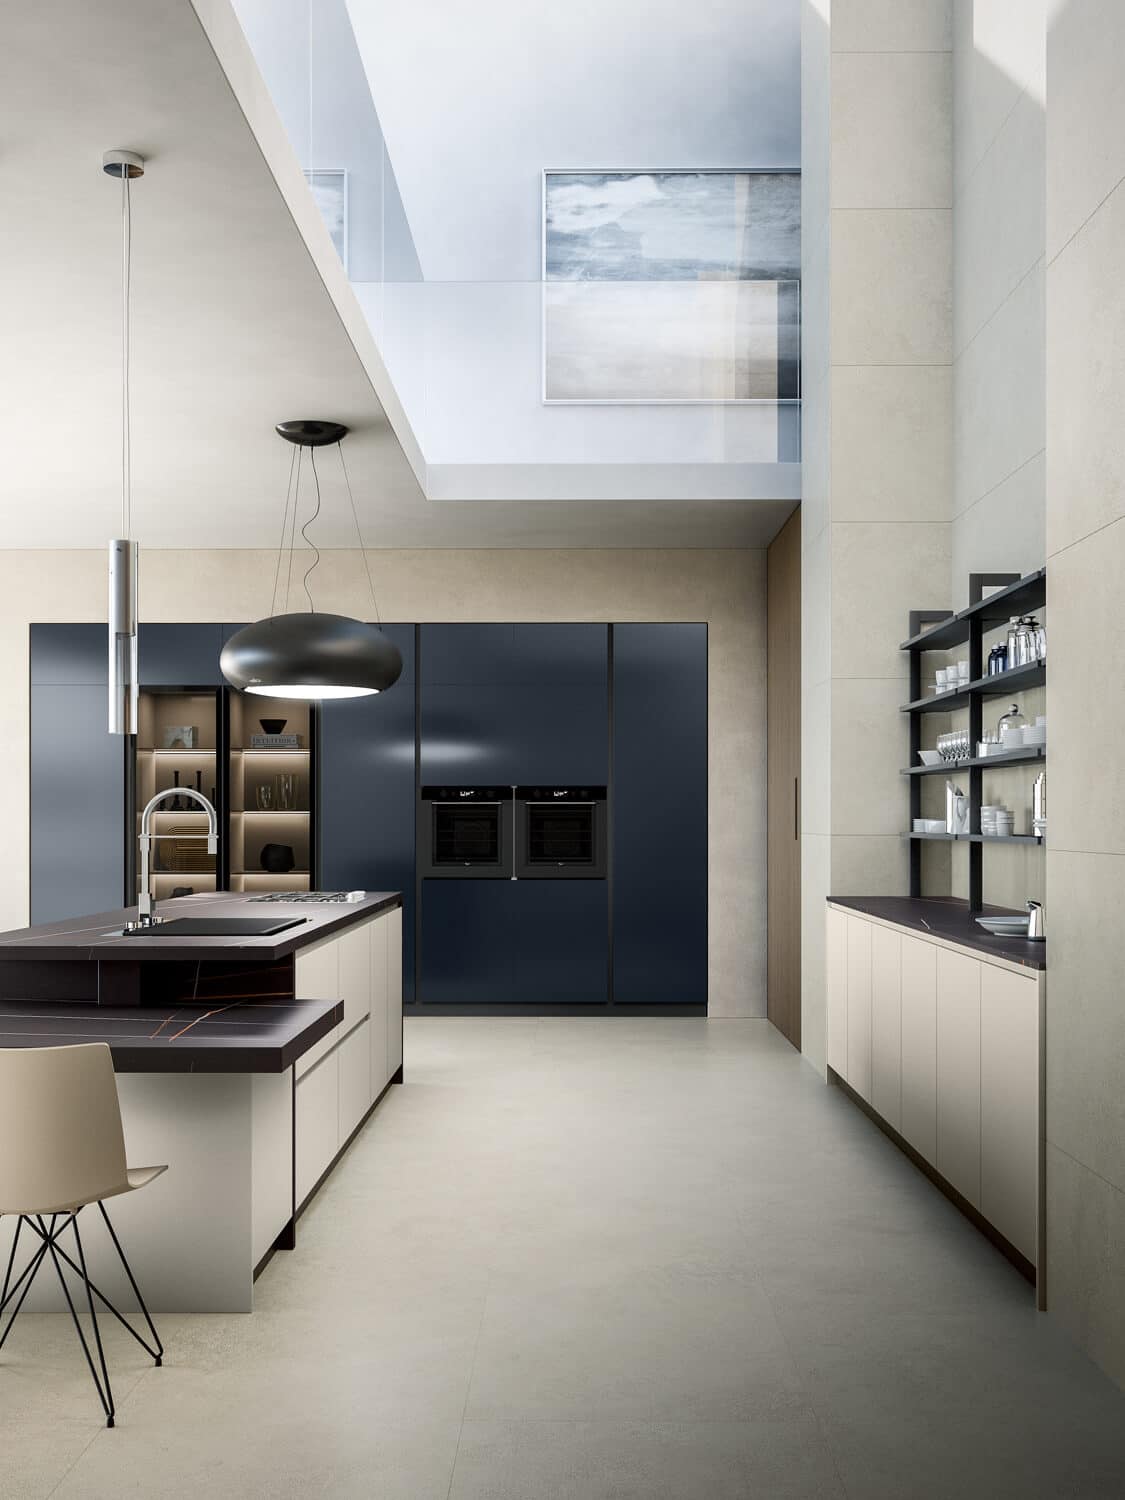 Pantry wall with tall cabinets in the smooth micalized Blue lacquer and framed glass cabinets.